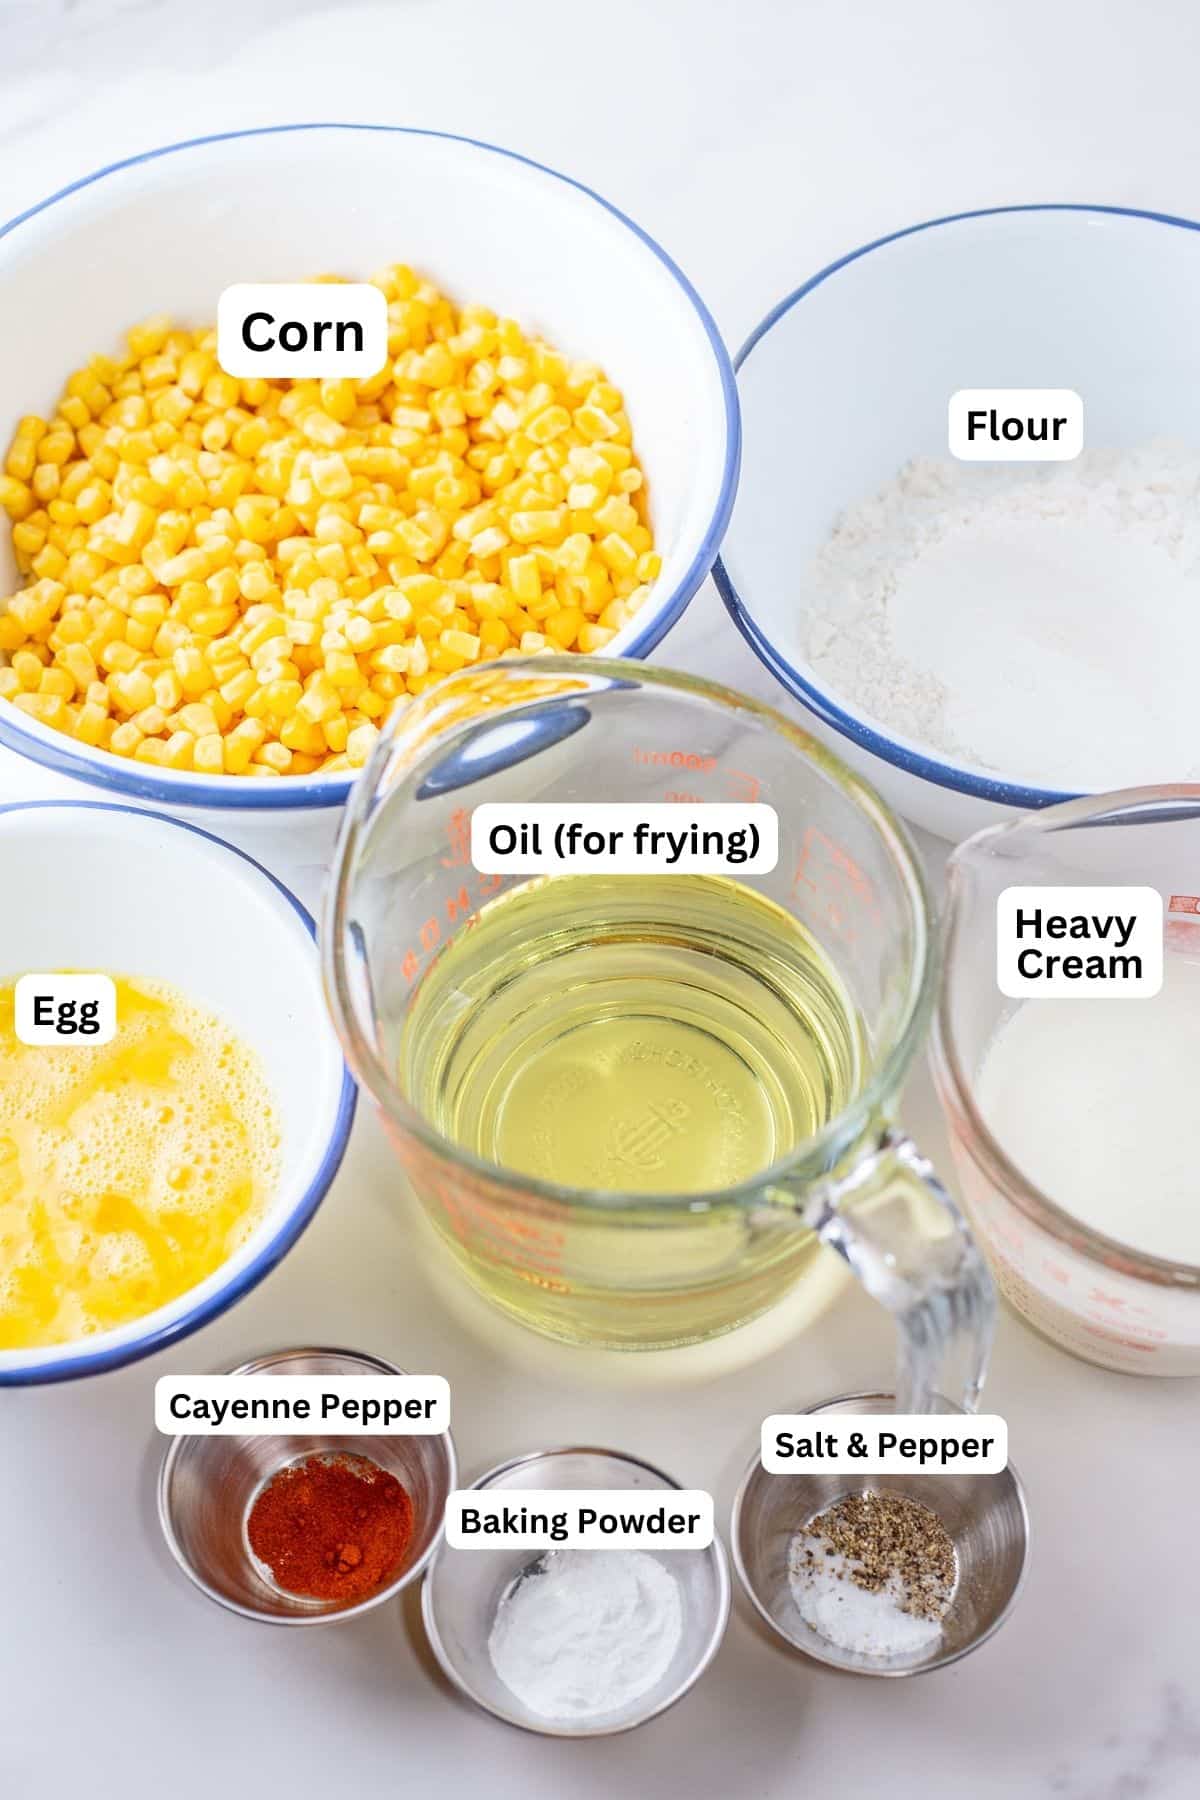 Tall image showing ingredients with labels.